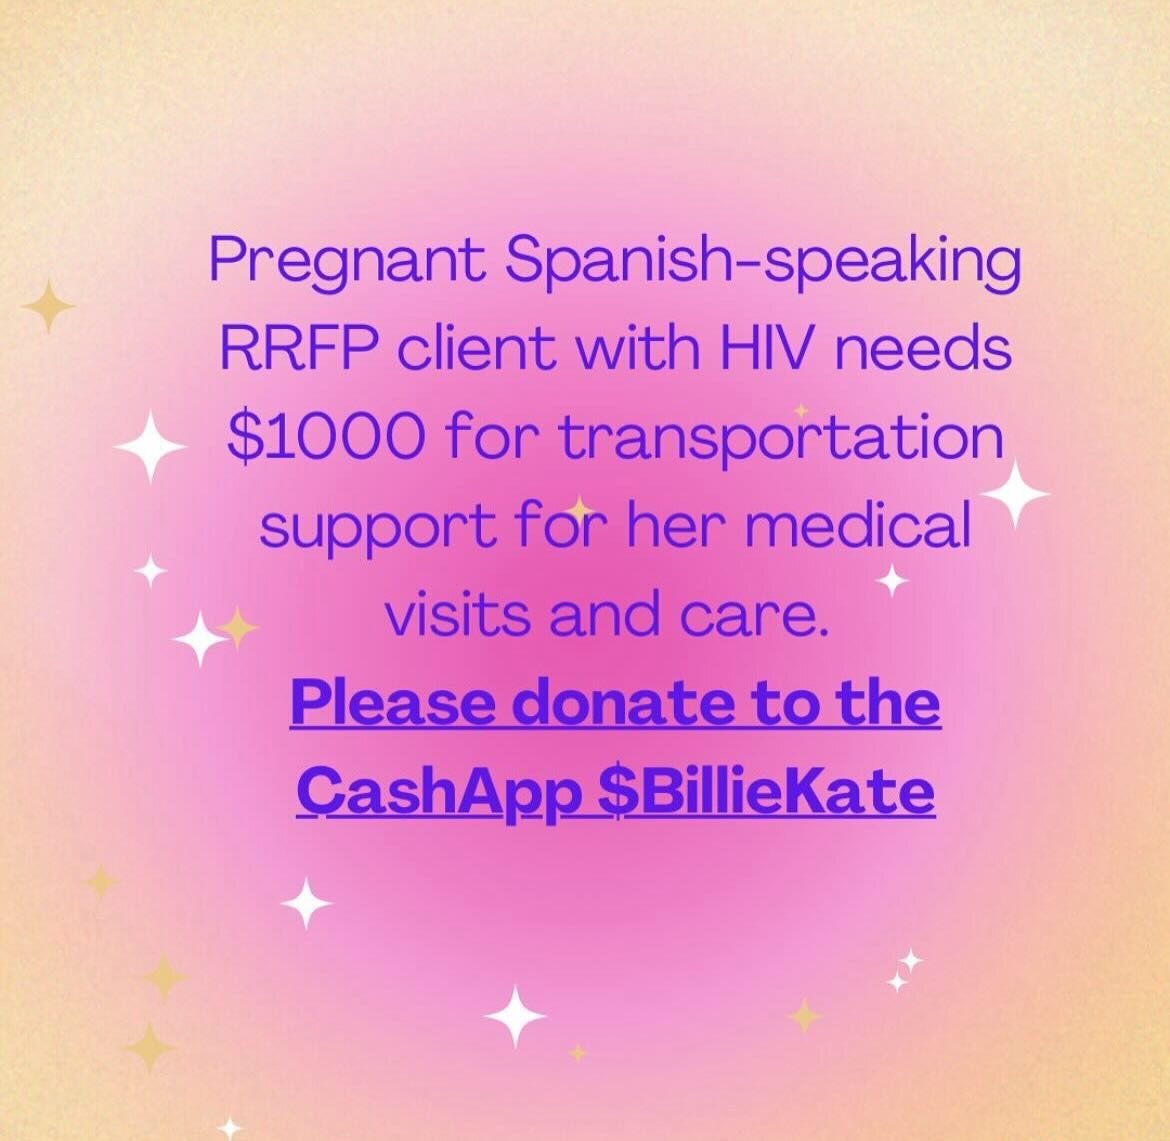 Pregnant Spanish-speaking RRFP client with HIV needs $1000 for transportation support for her medical visits and care. Please donate to the CashApp $BillieKate 
&bull;
We&rsquo;ll update when this need is met!